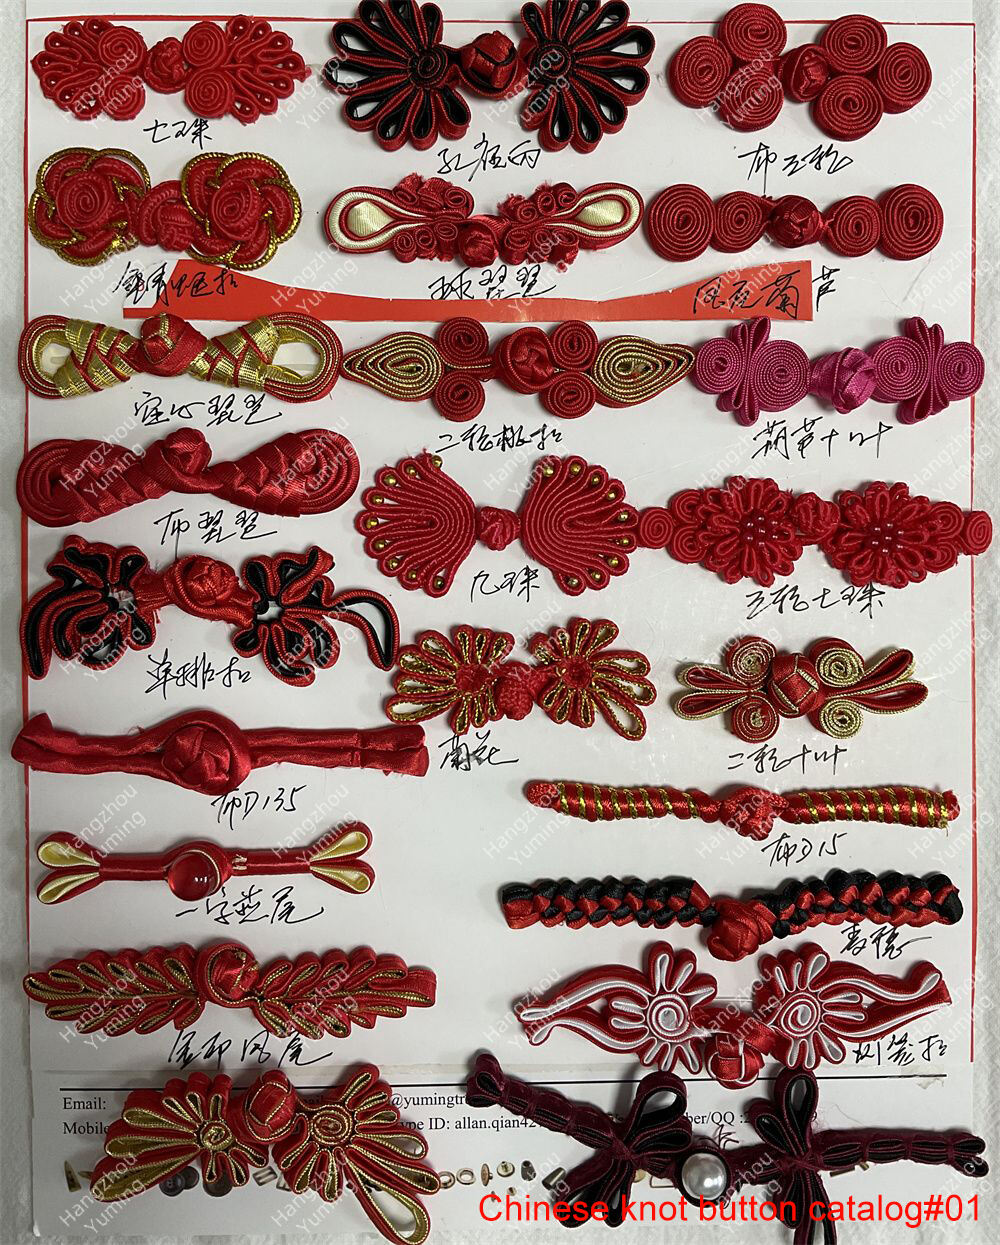 Chinese knot button catalog